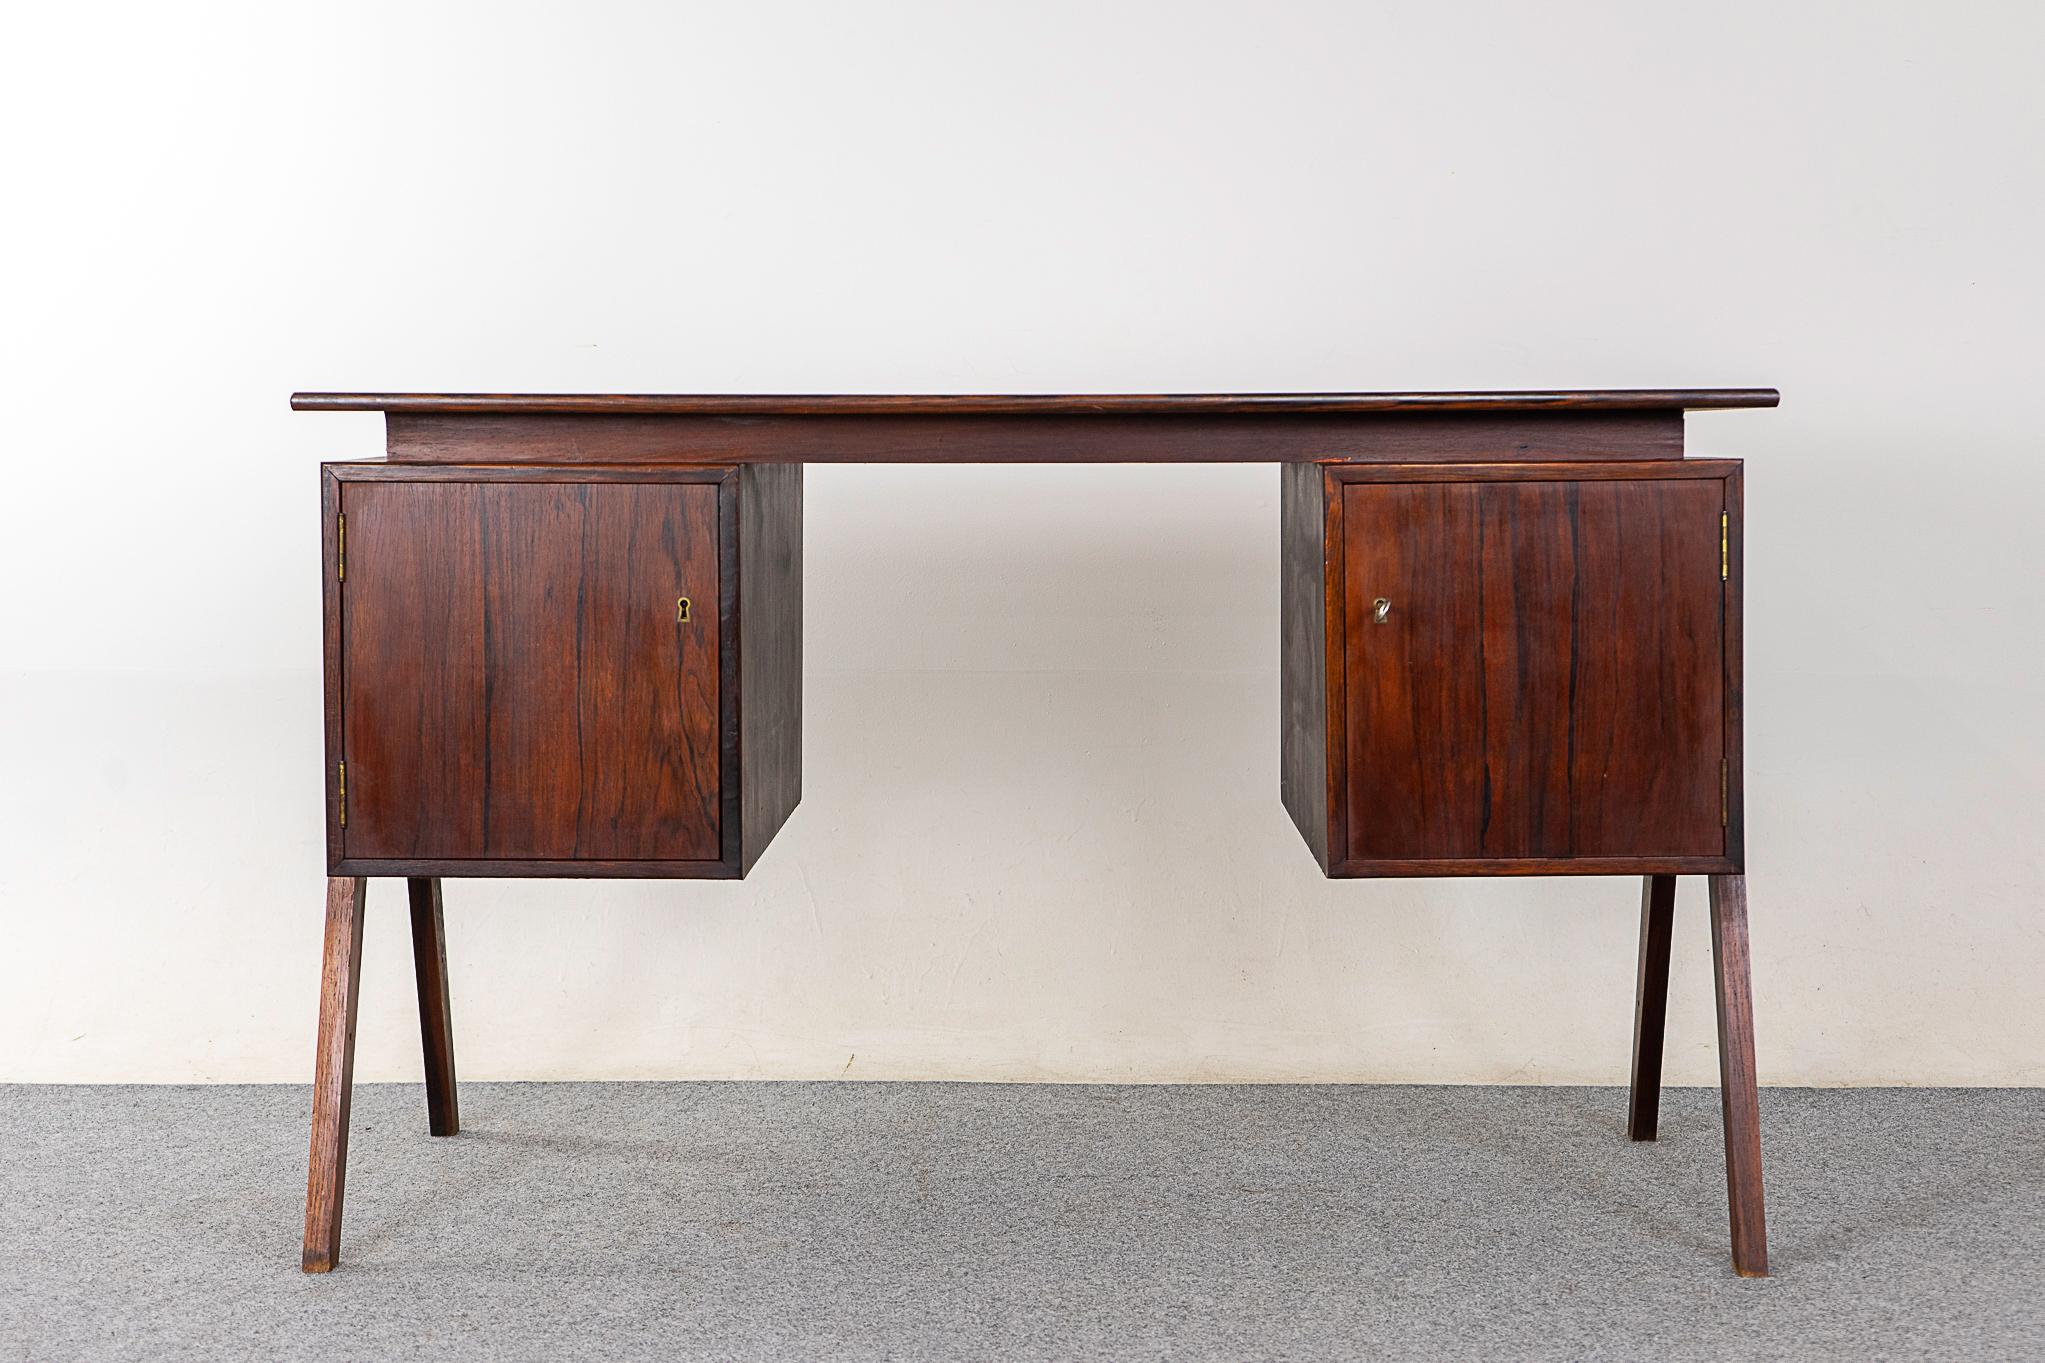 Danish Modern rosewood desk, circa 1960's. Writing desk finished on both sides, this desk can be placed in the center of a room and look fantastic on all sides. This writing desk features a clean uncluttered design with splayed legs and beautiful